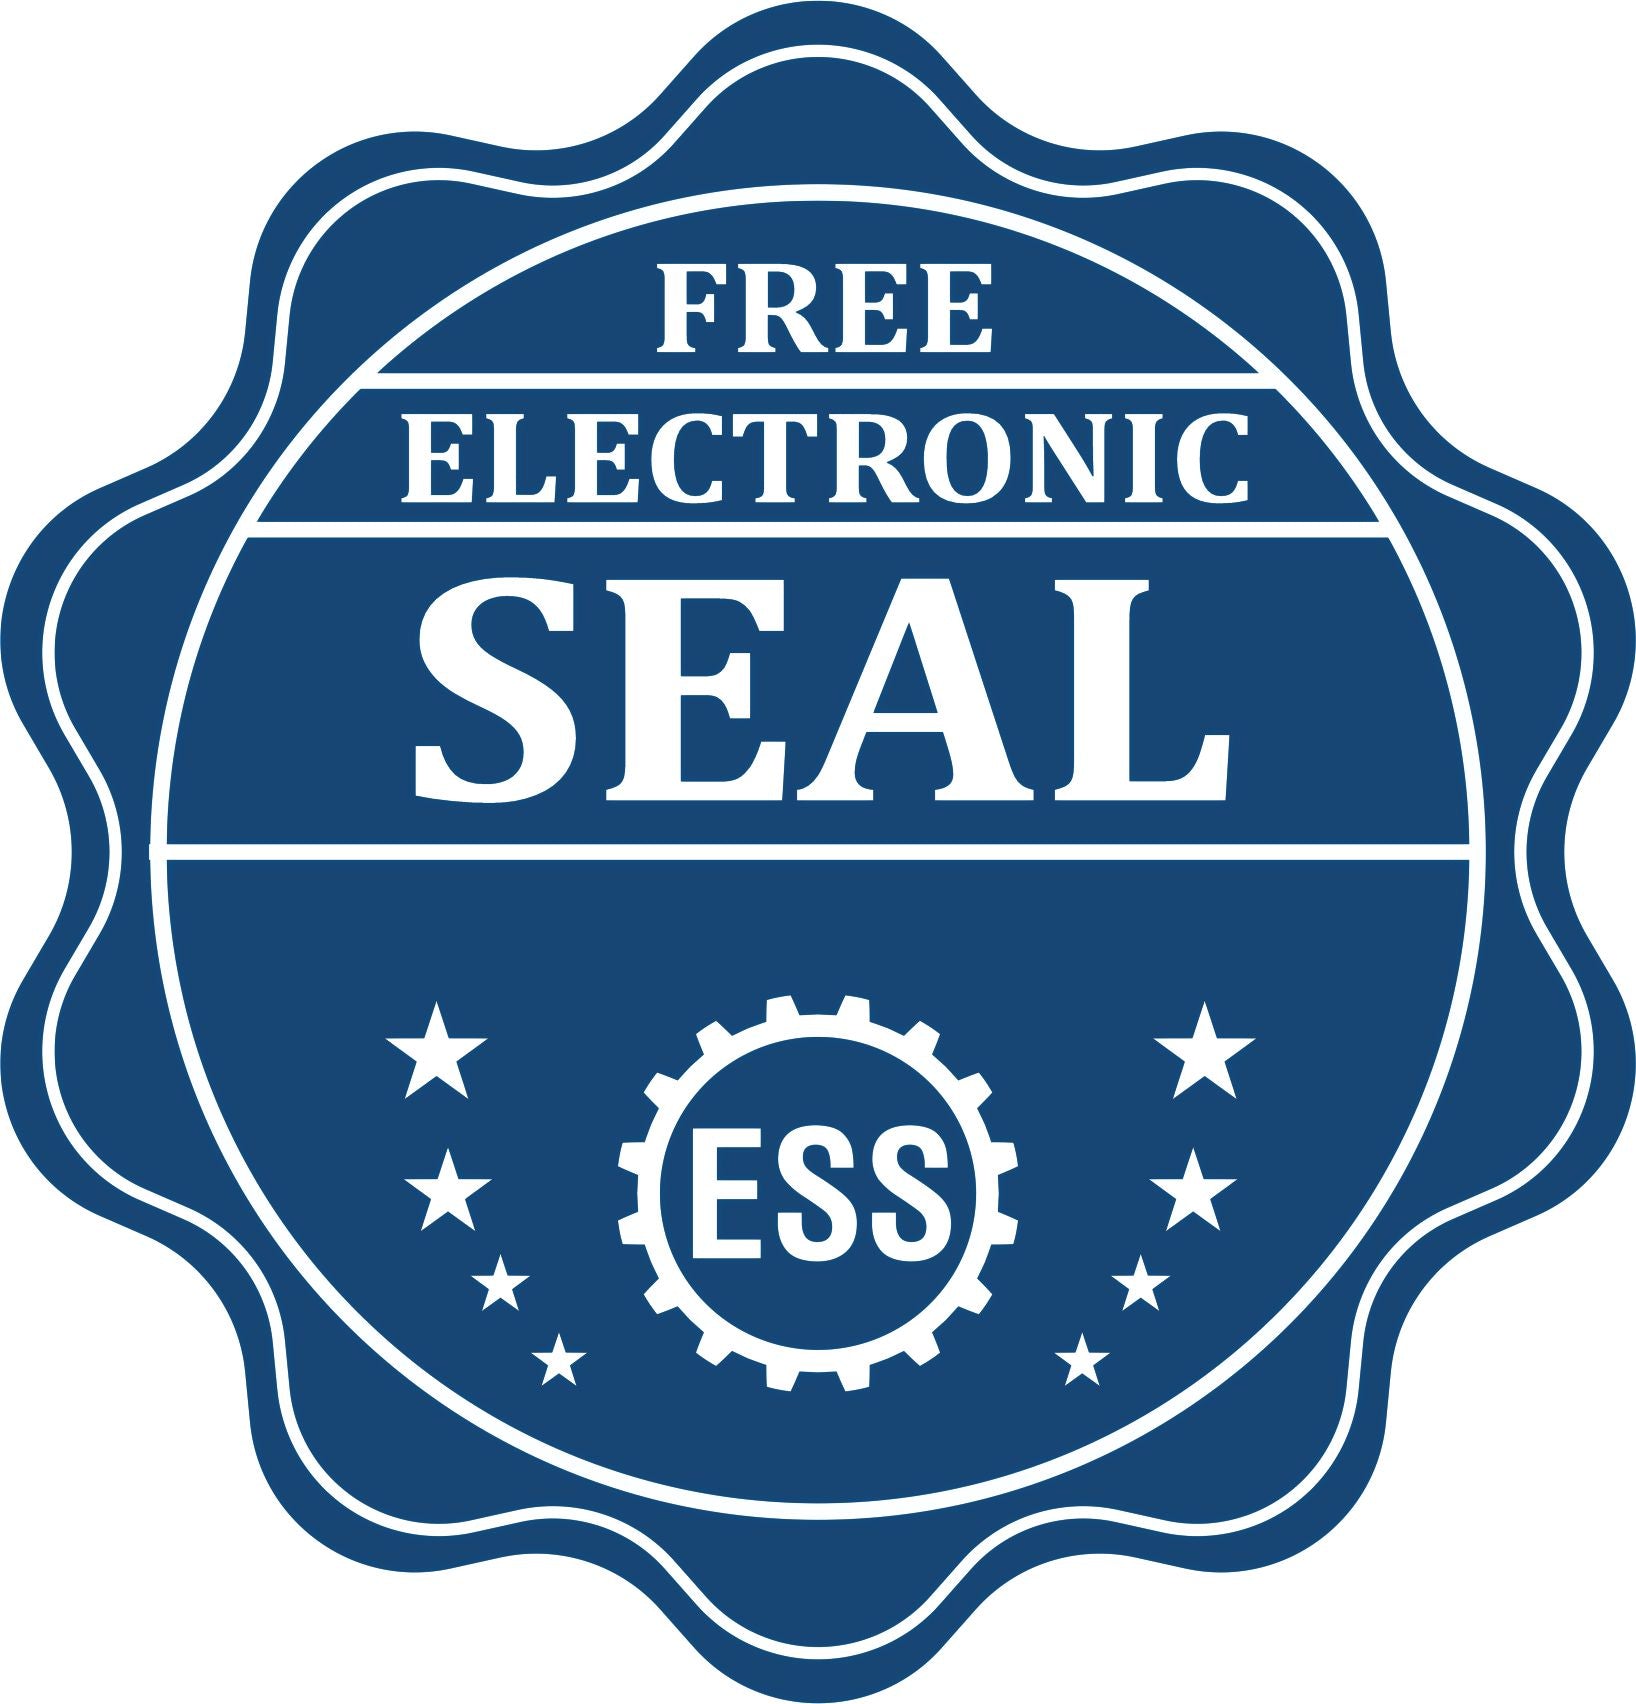 A badge showing a free electronic seal for the Hybrid Montana Landscape Architect Seal with stars and the ESS gear on the emblem.